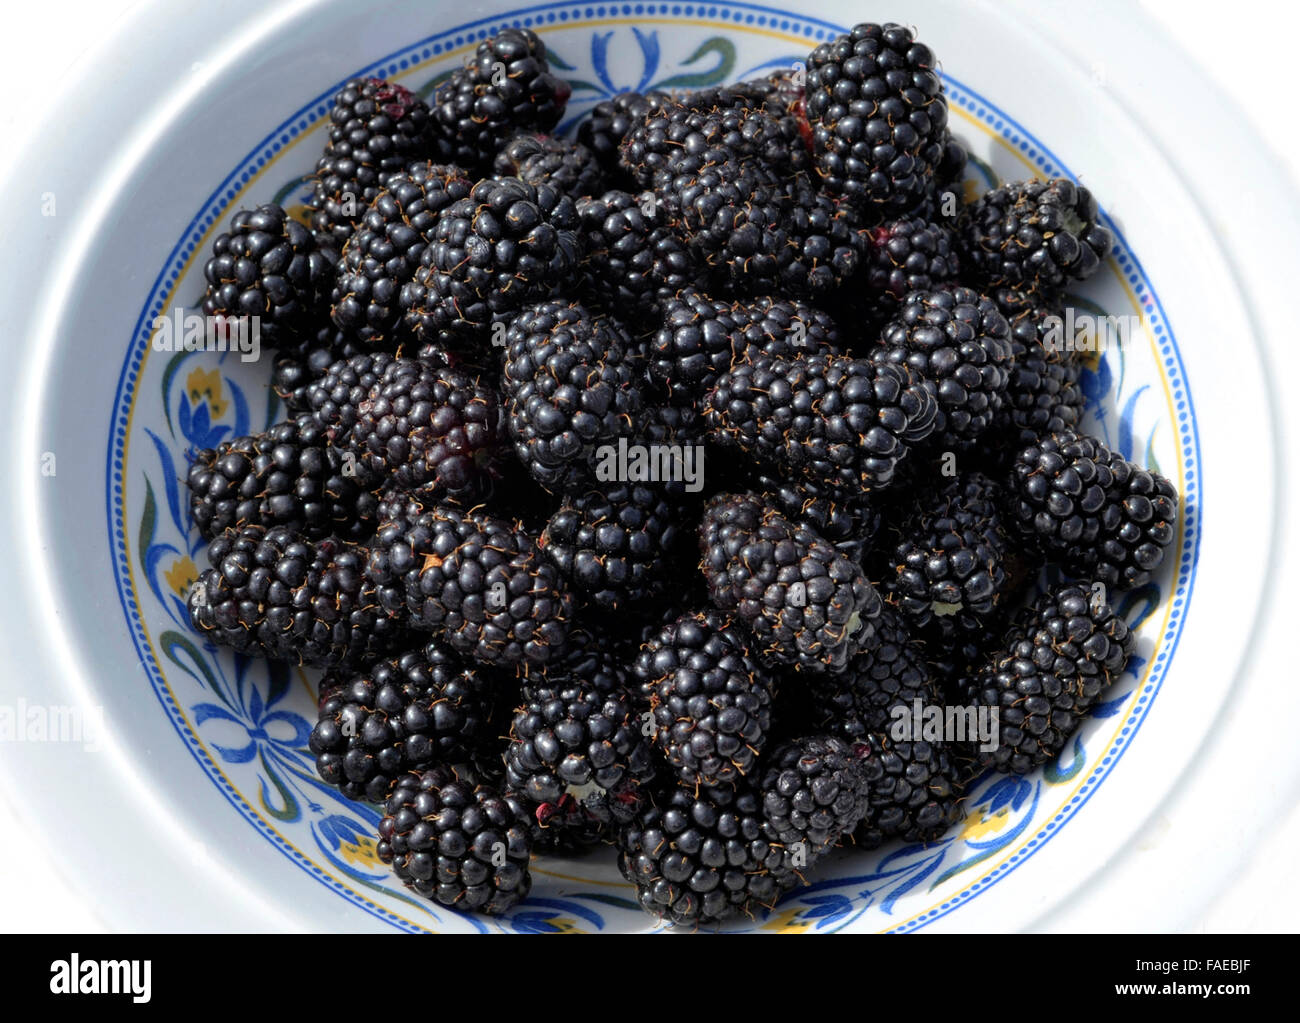 Healthy organic homegrown cultivated blackberries in a dish. Stock Photo